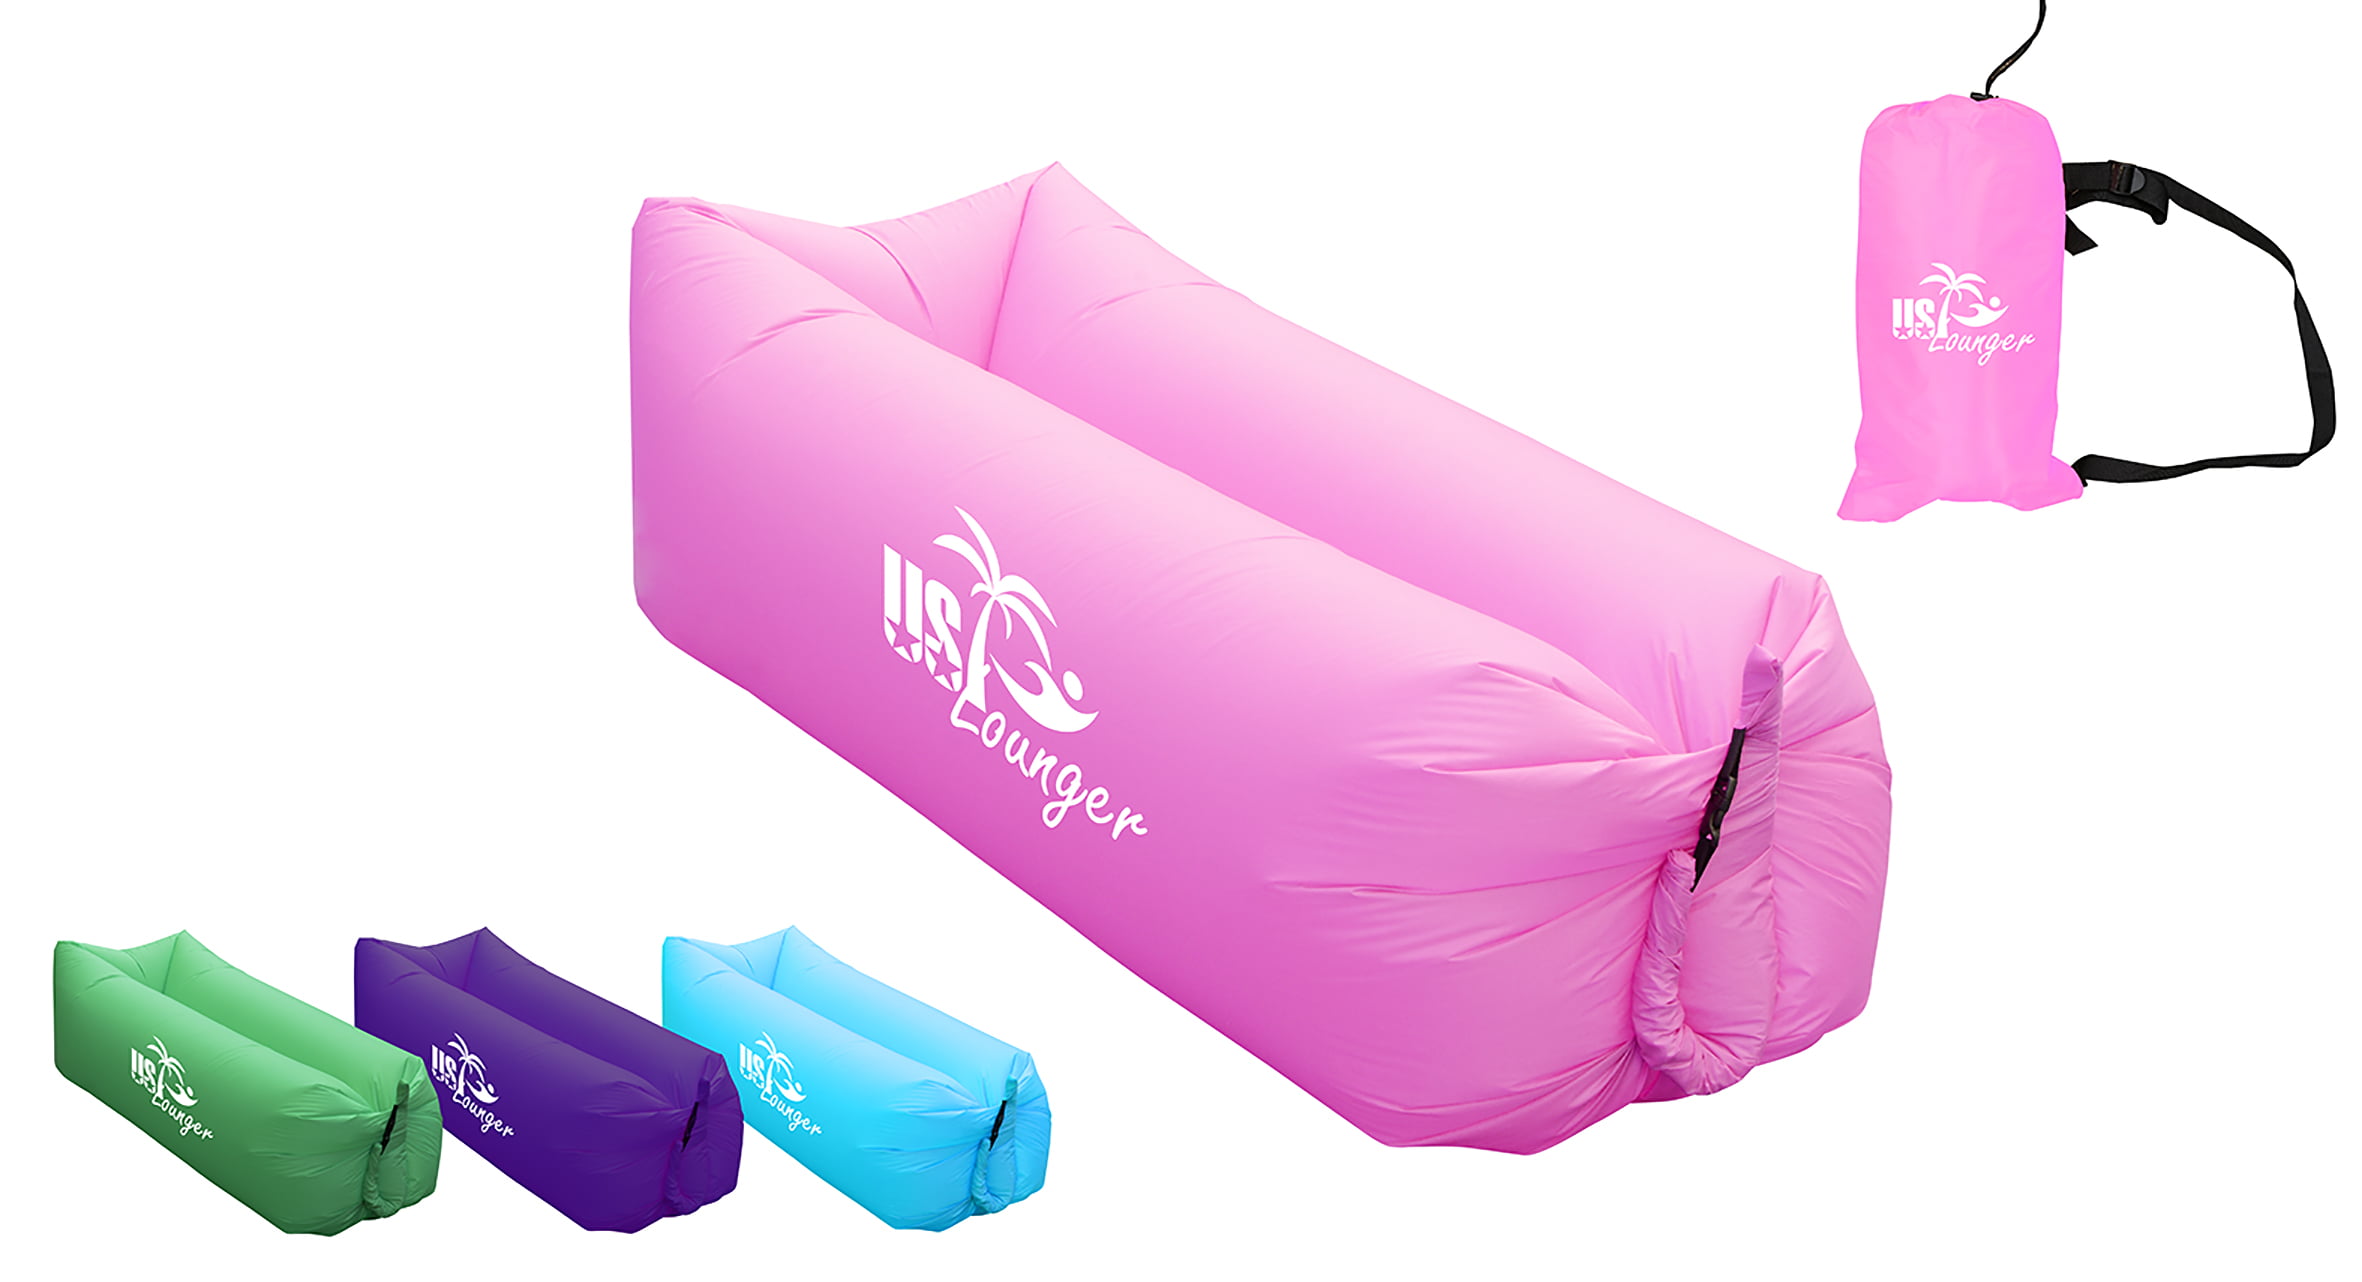 fast inflatable lounger